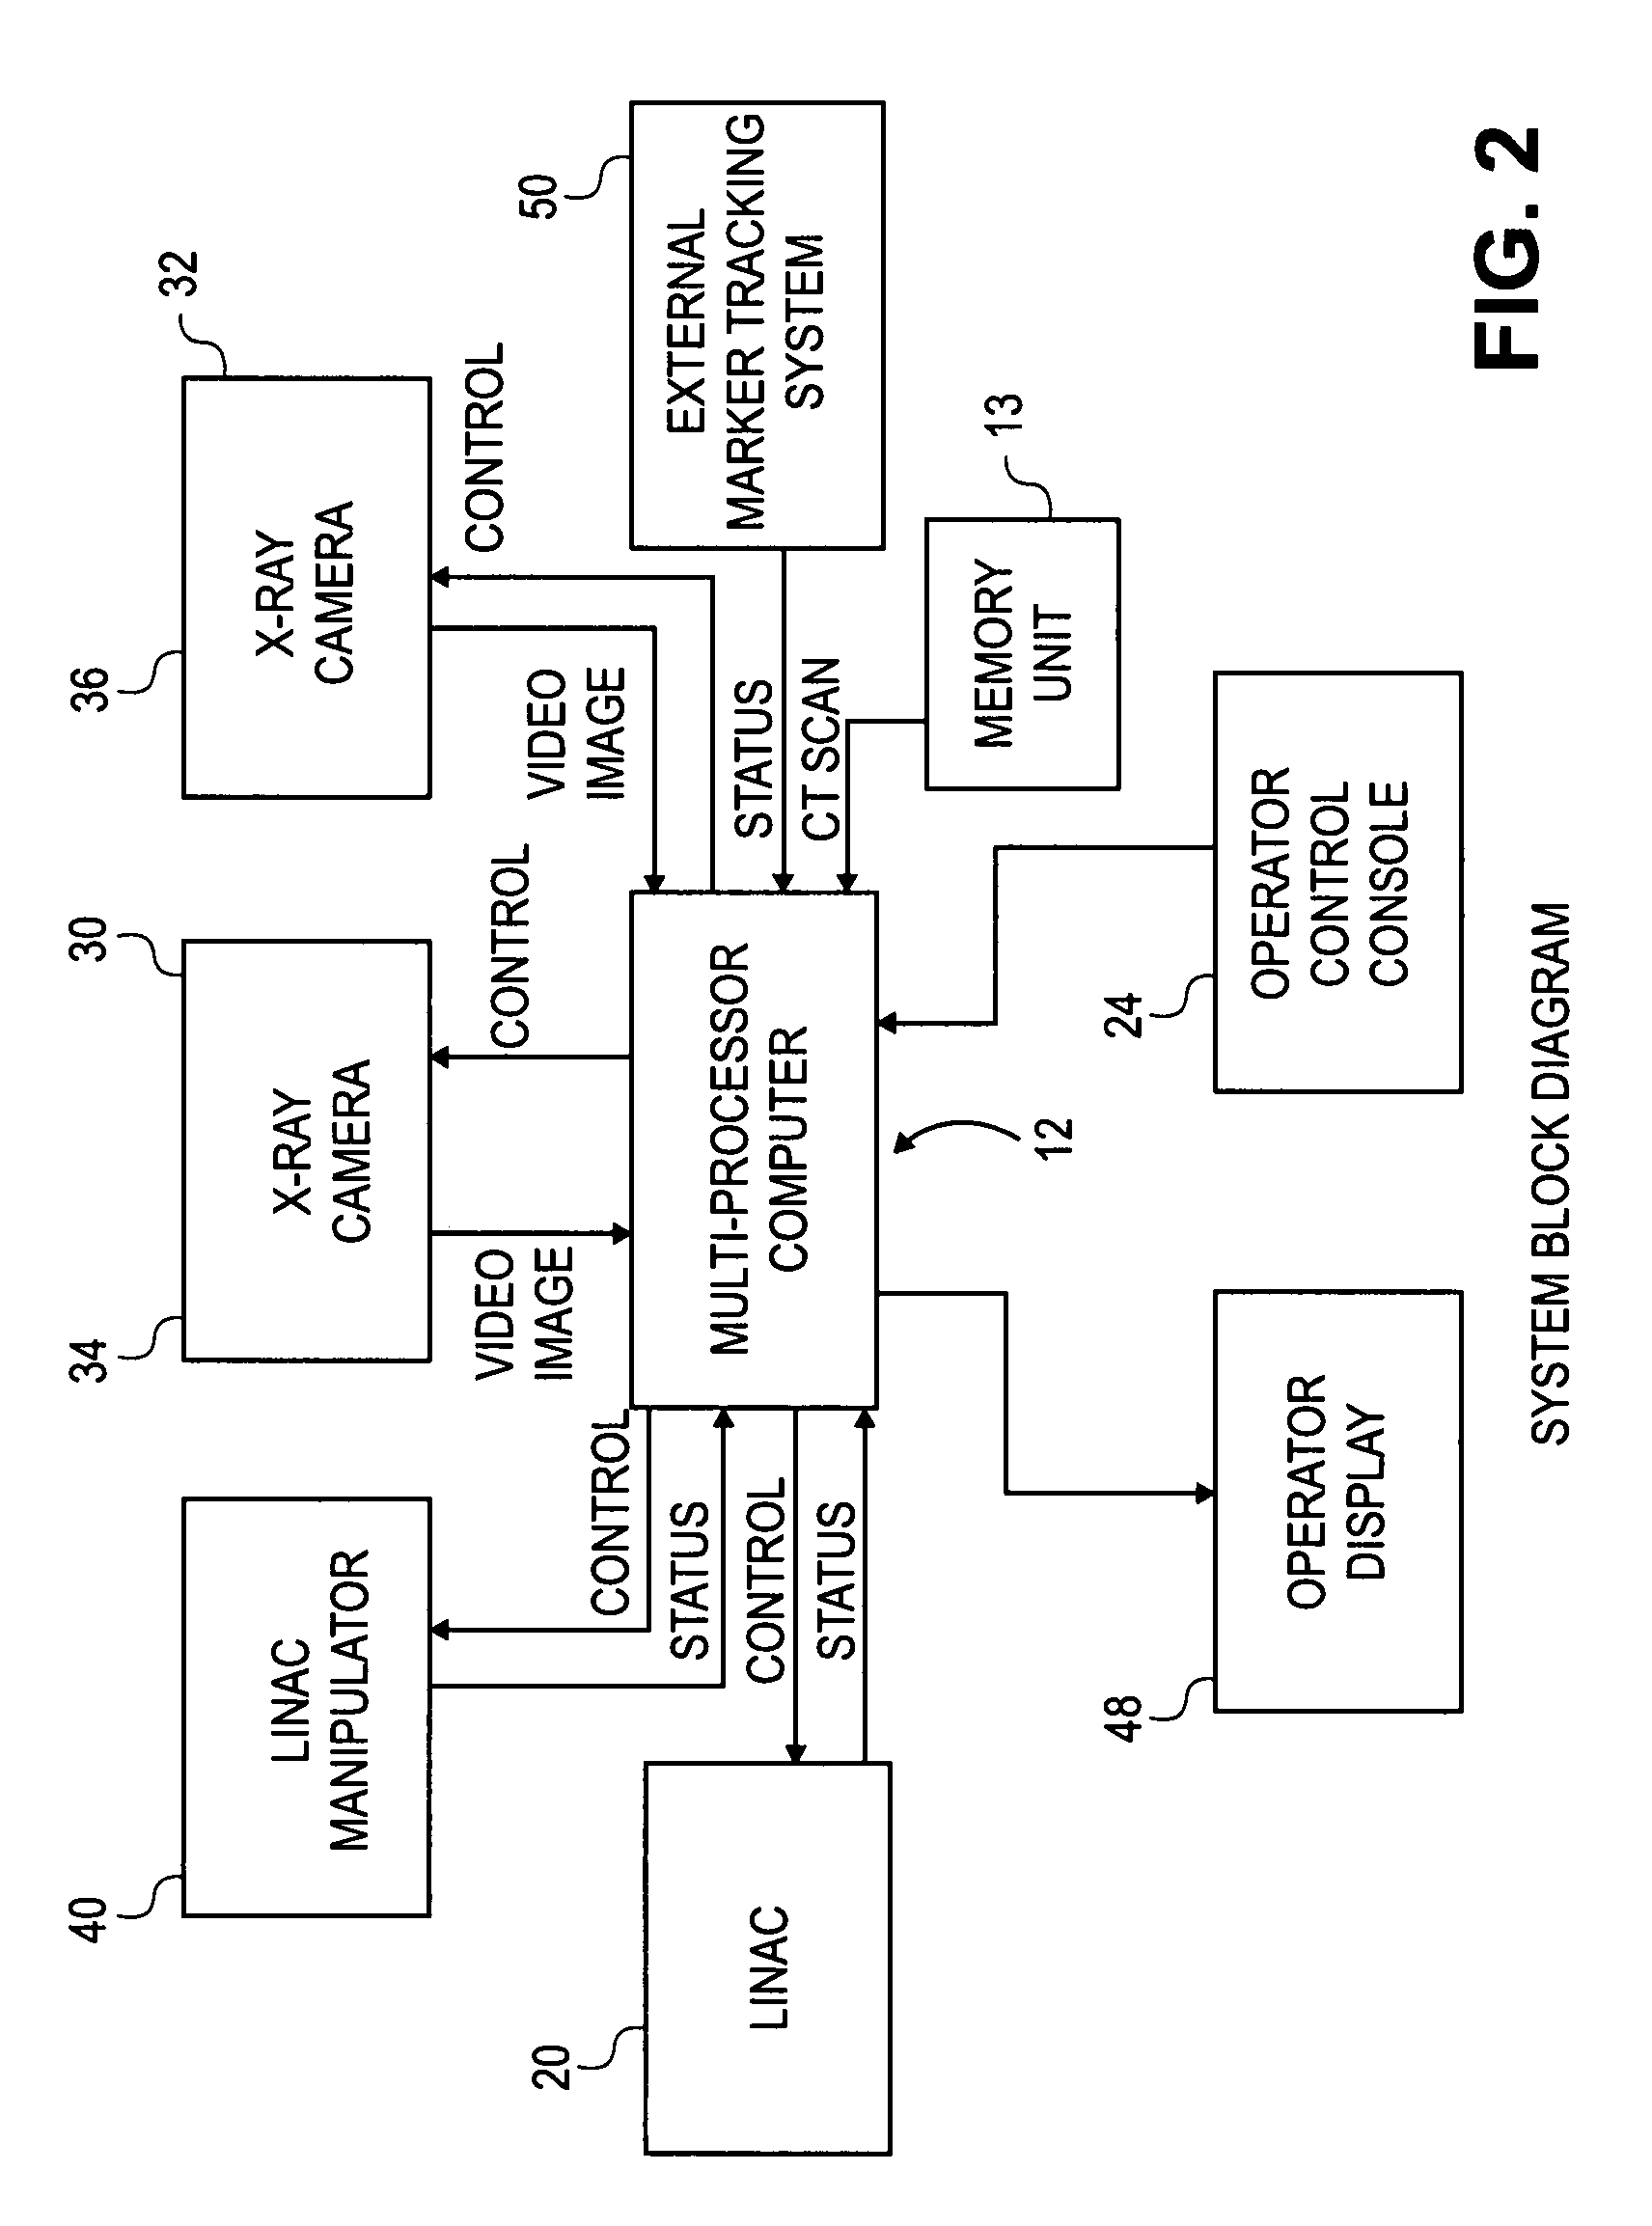 Method and apparatus for tracking an internal target region without an implanted fiducial